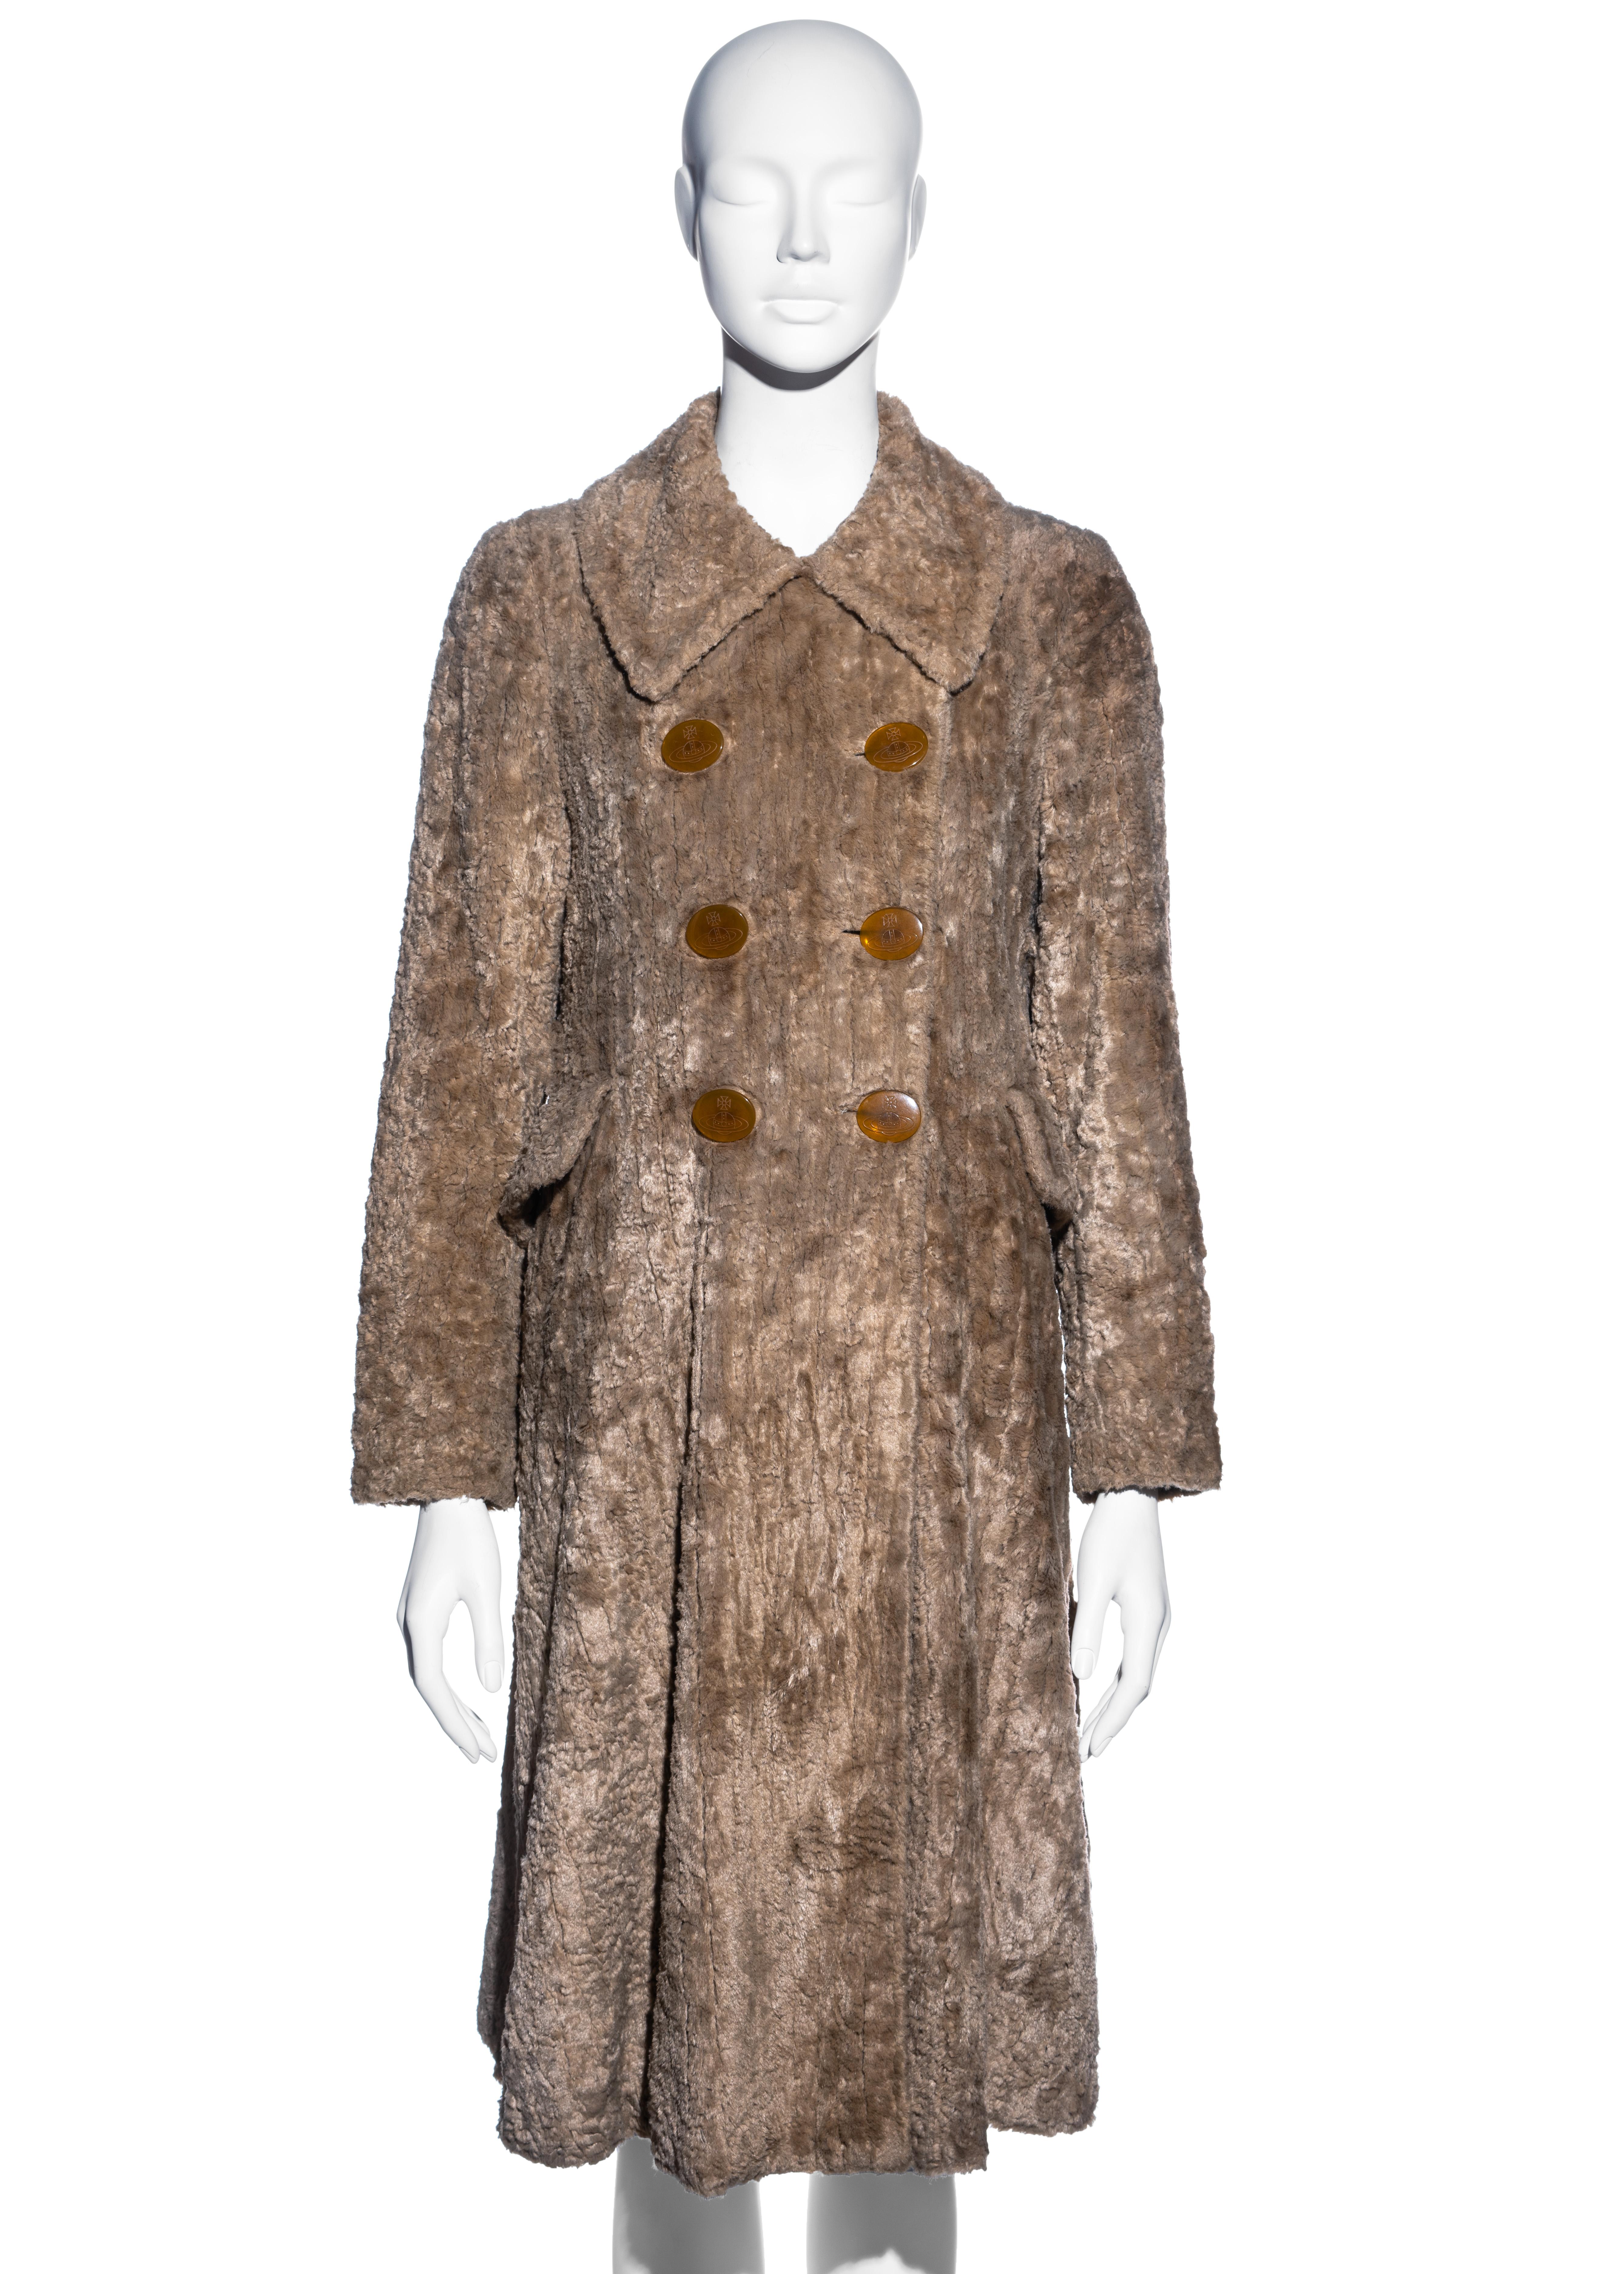 ▪ Vivienne Westwood beige chenille swing coat
▪ 69% Rayon, 31% Cotton
▪ Large org etched buttons
▪ Two front flap pockets
▪ Large flat collar
▪ Loose fit
▪ IT 40 - FR 36 - UK 8 - US 4
▪ Fall-Winter 1994